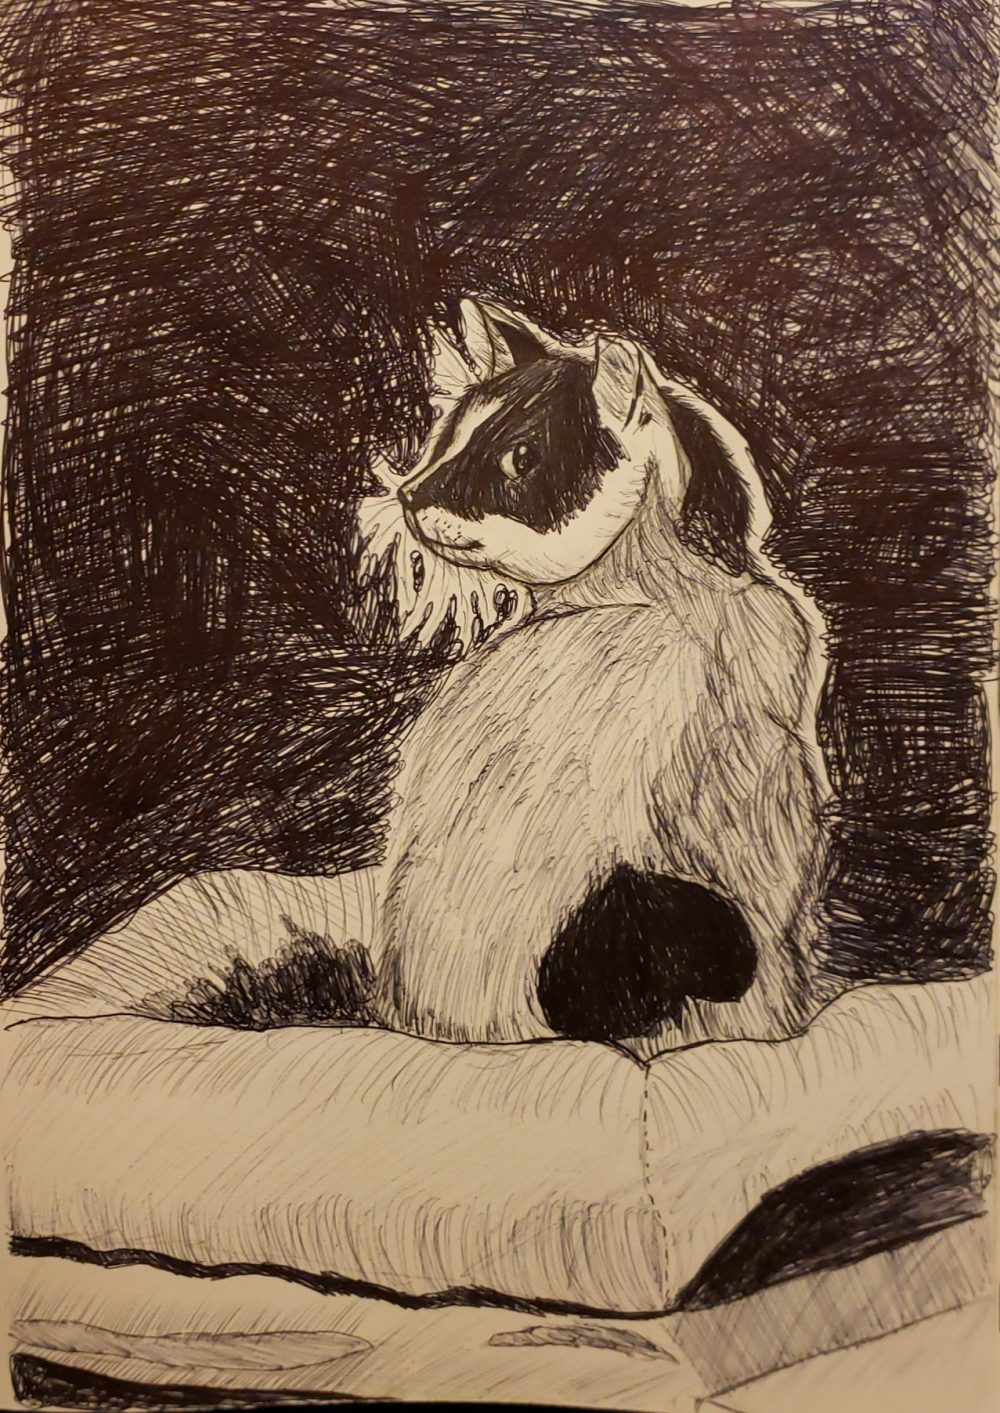 A black and white drawing of a cat sitting on a surface with a black background.